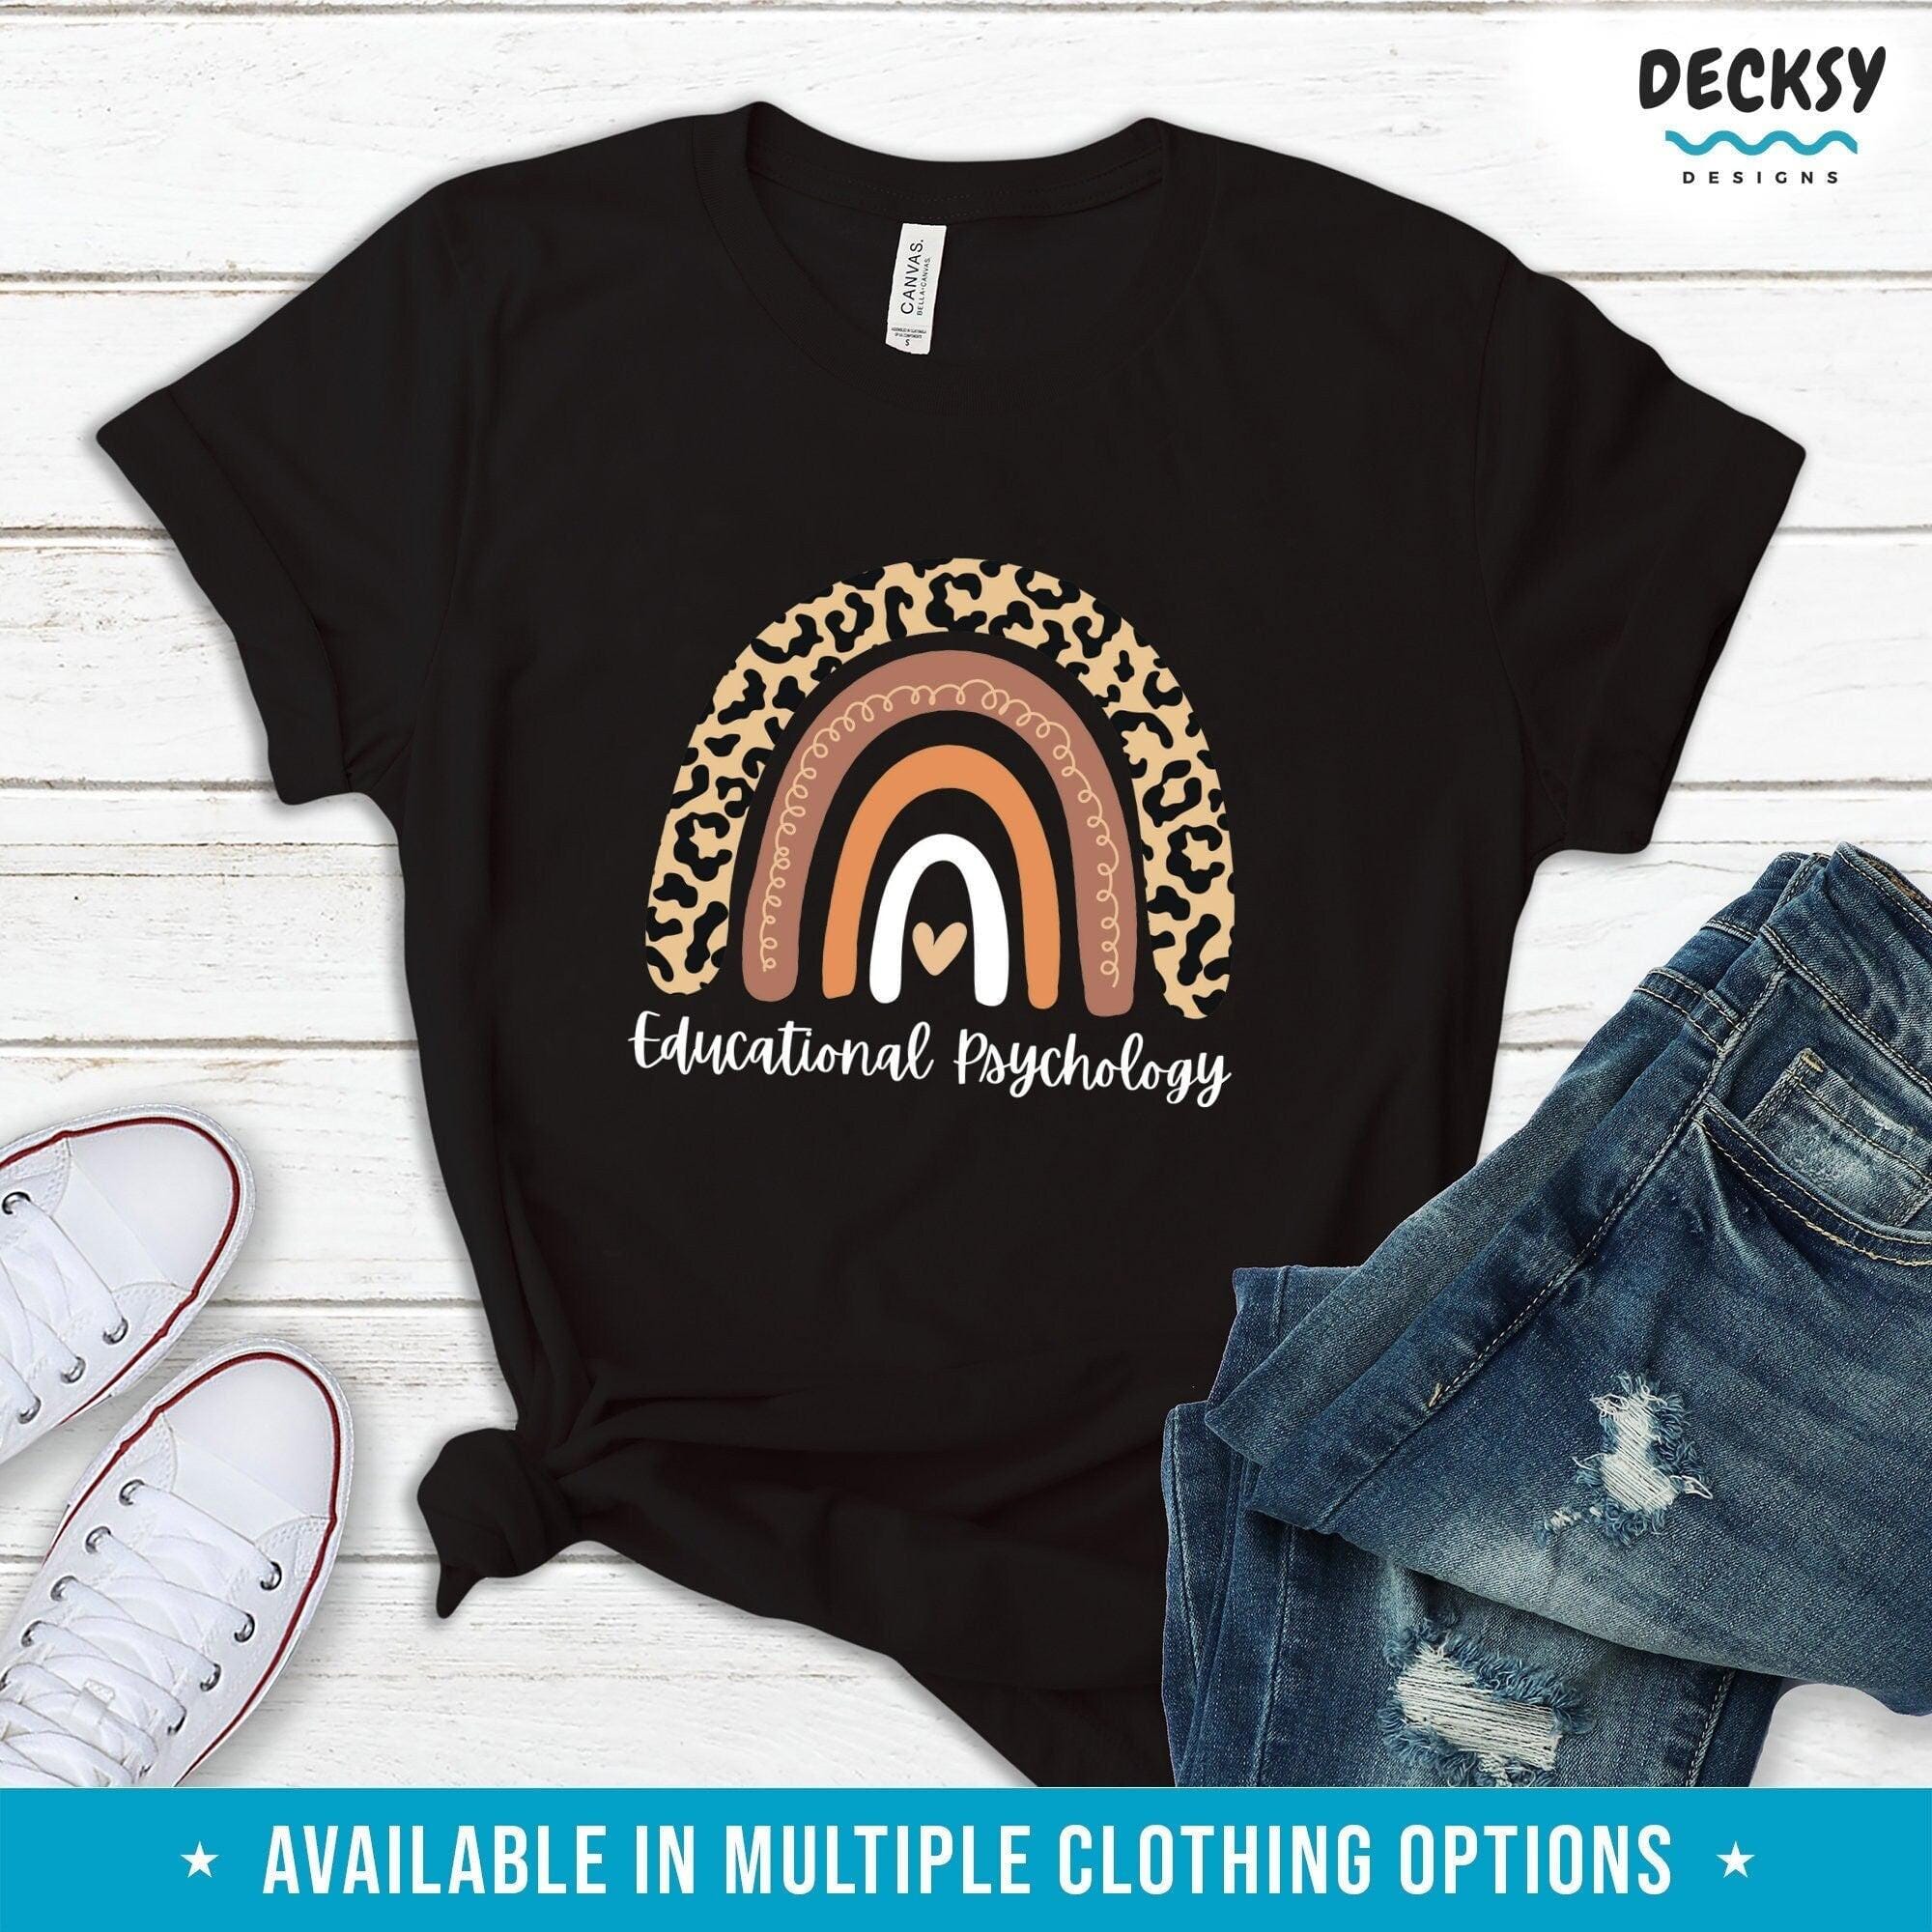 Educational Psychology Shirt, School Psychologist Gift-Clothing:Gender-Neutral Adult Clothing:Tops & Tees:T-shirts:Graphic Tees-DecksyDesigns